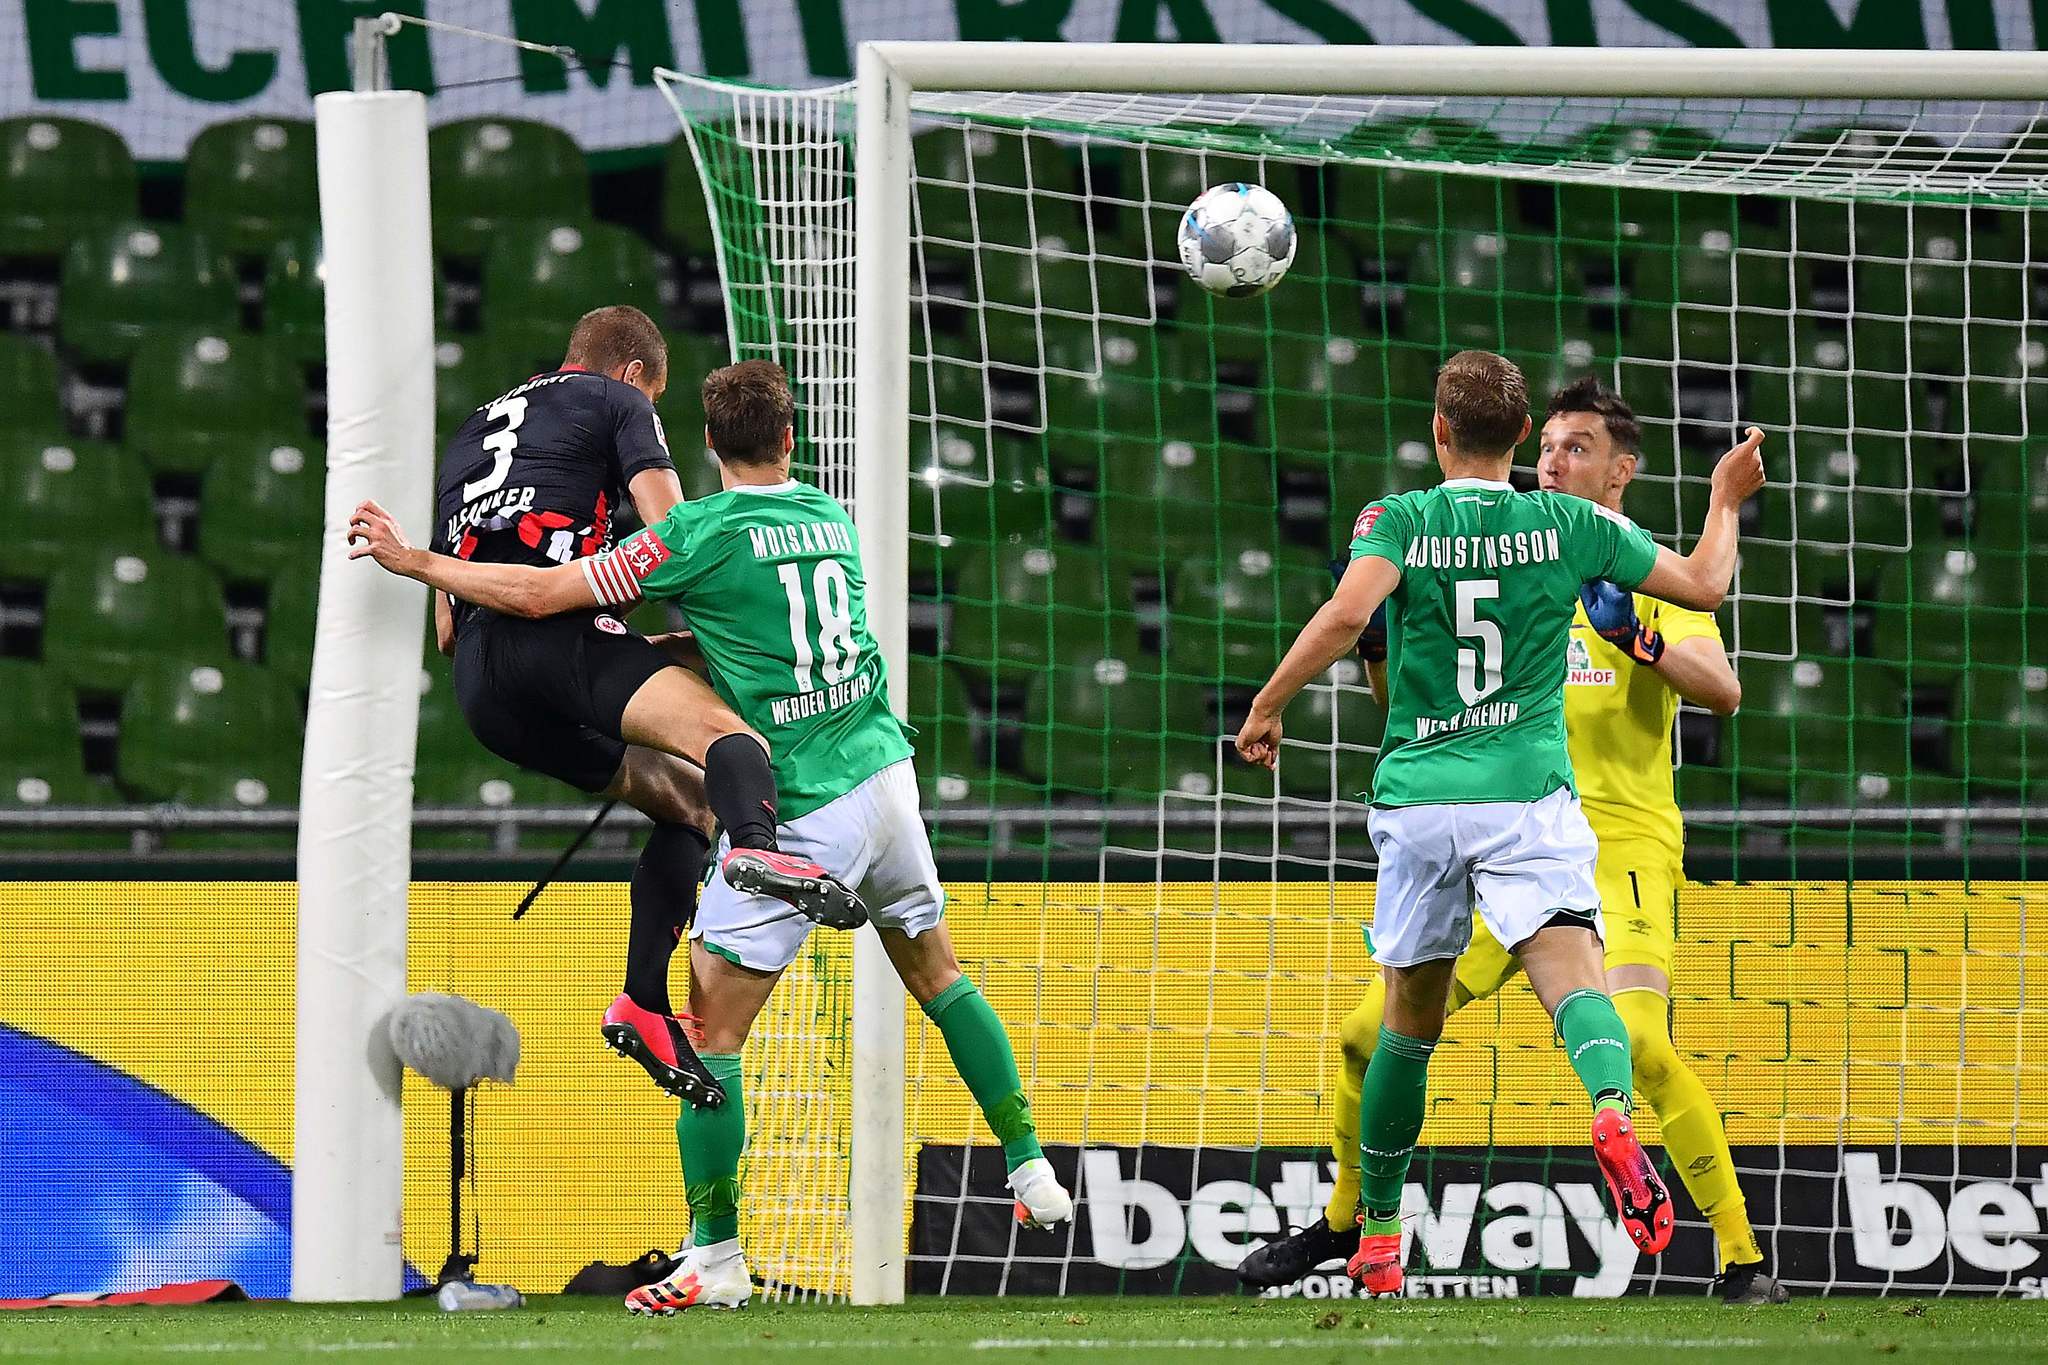 Instant impact from Ilsanker secures win for Eintracht away at Werder